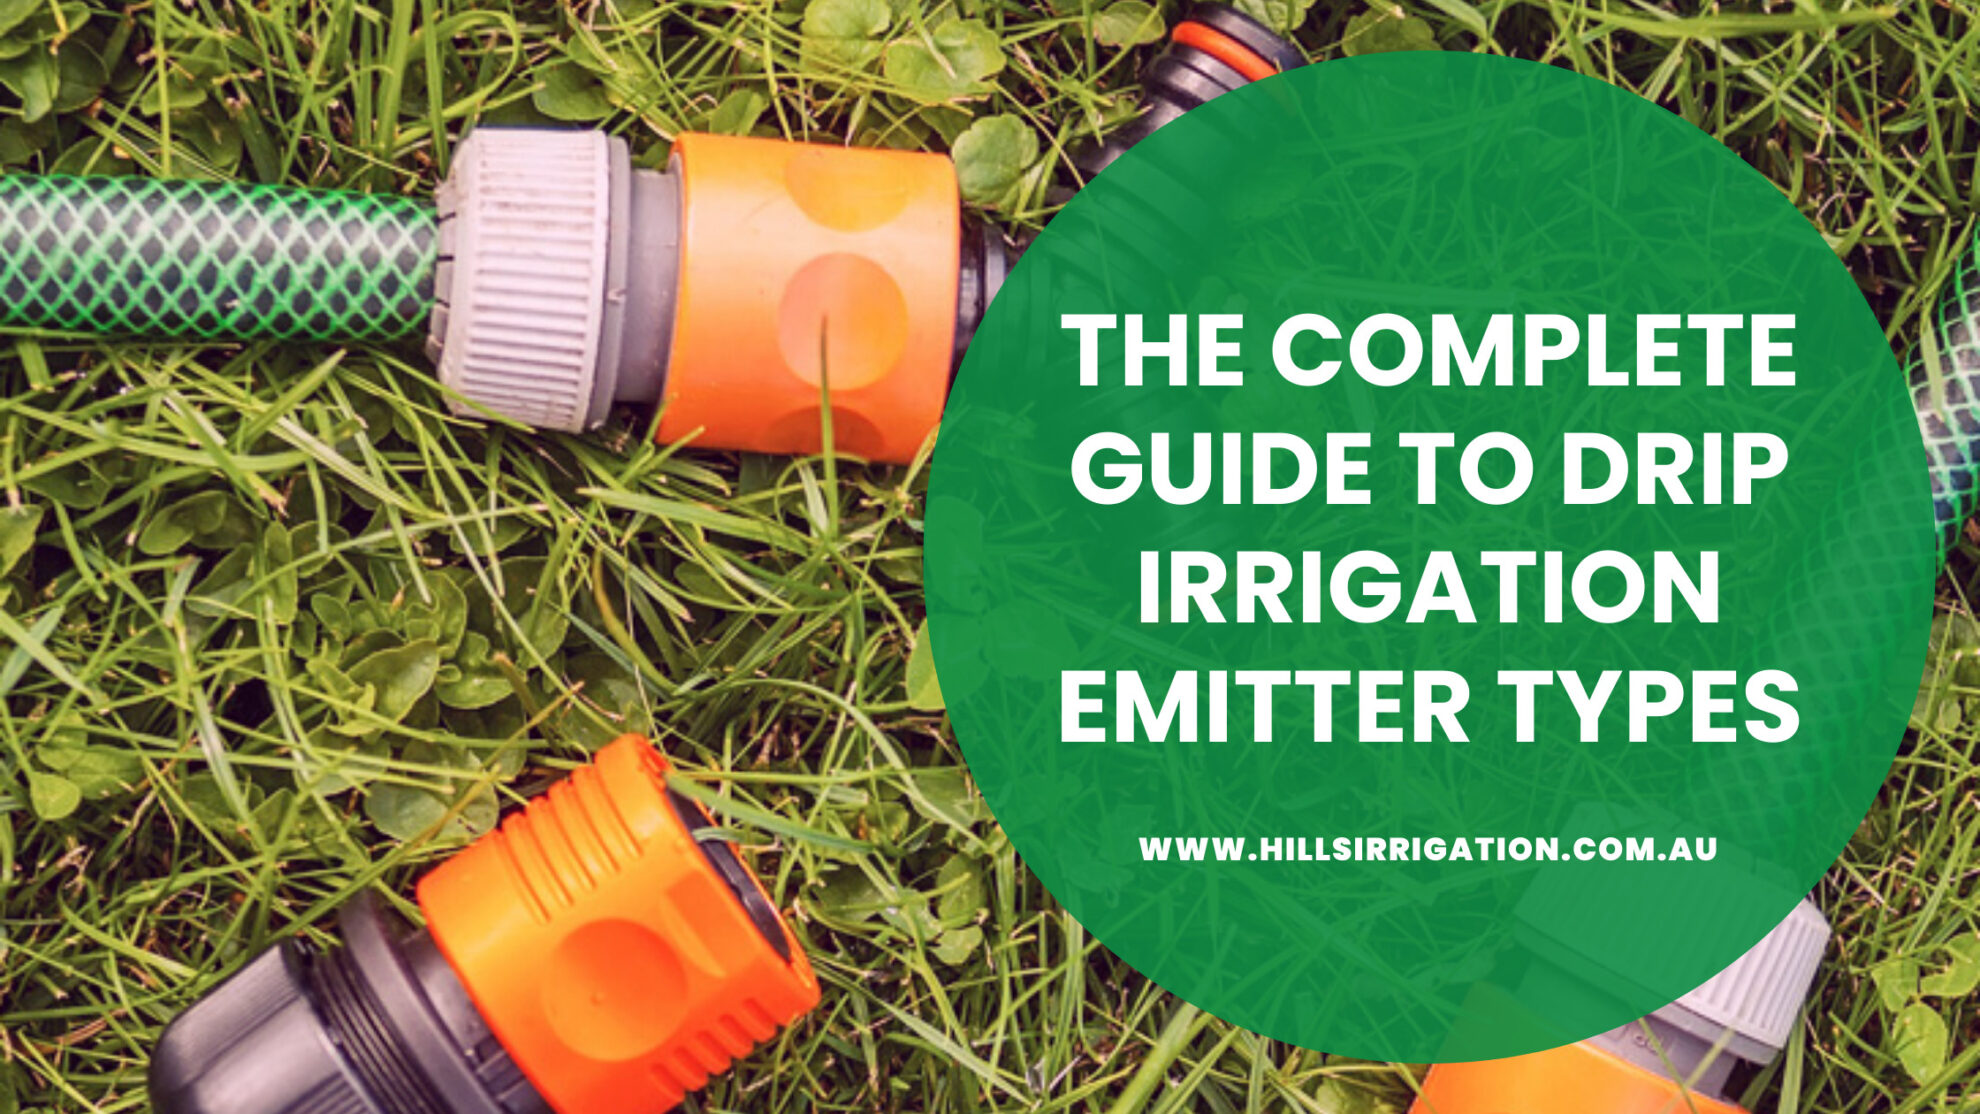 The Complete Guide to Drip Irrigation Emitter Types - Hills